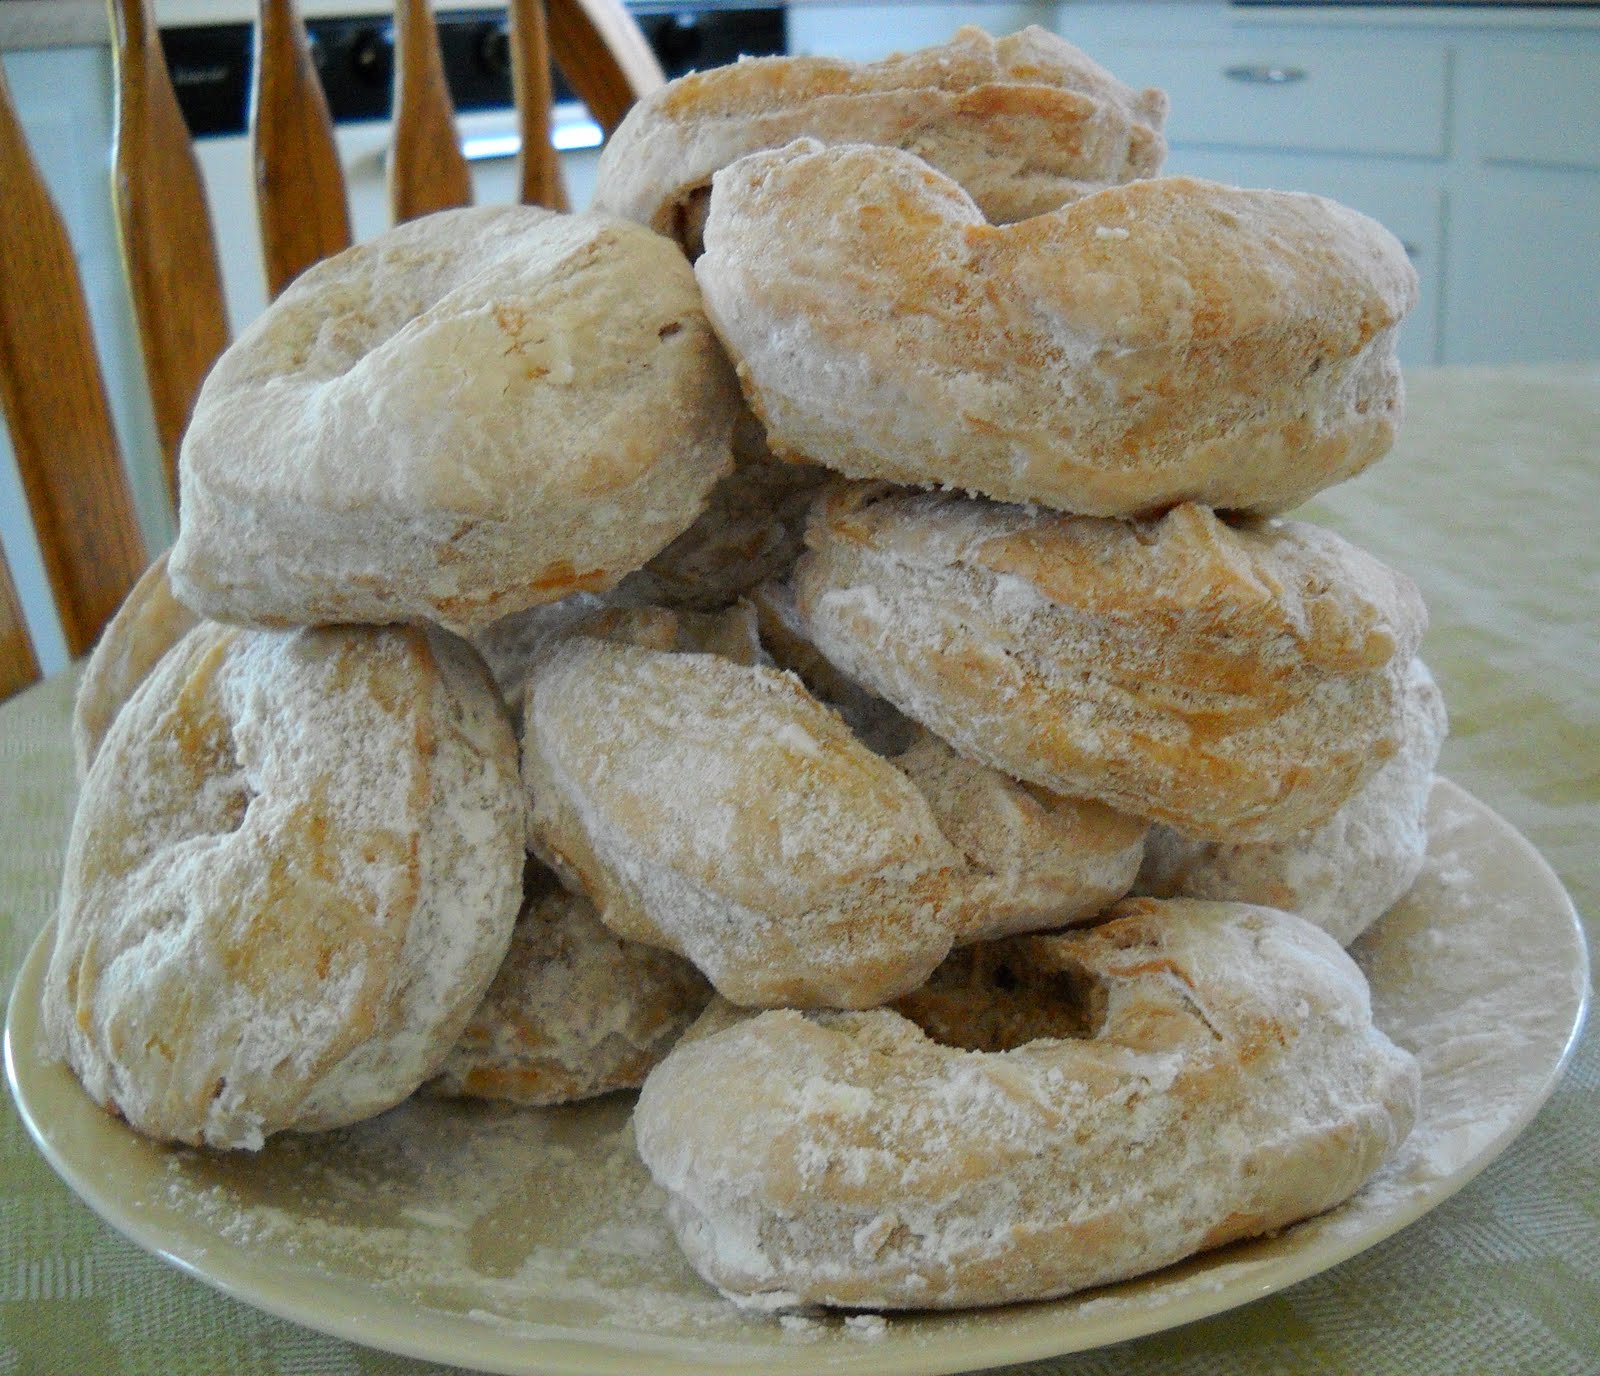 The Midwest Texan: Fast & Easy Fry Bread Donuts